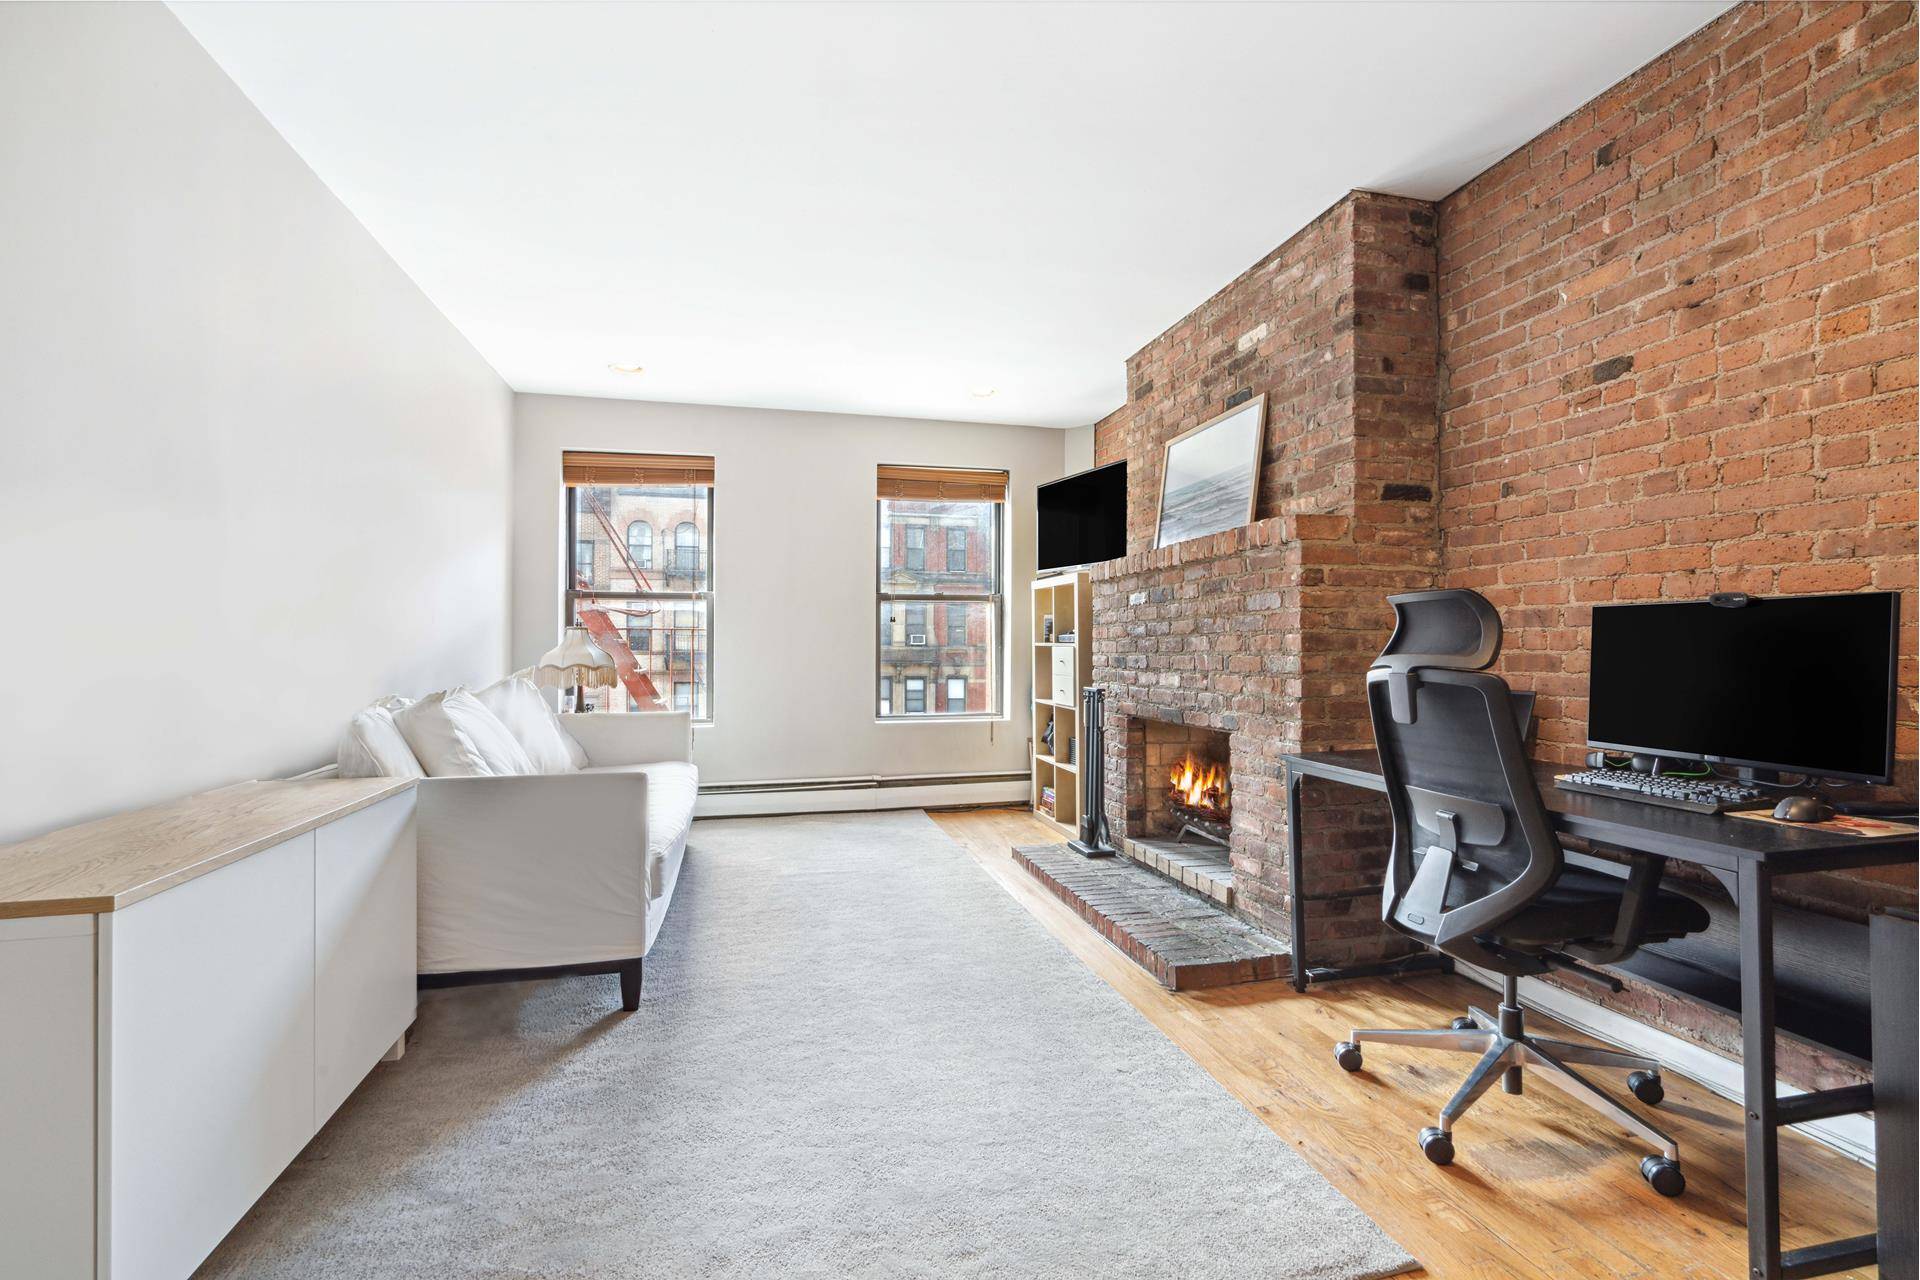 Sensational Hell's Kitchen one bedroom with a sought after floor plan offering separation of space, placing the living room and bedroom at opposite ends of the home for optimal privacy.